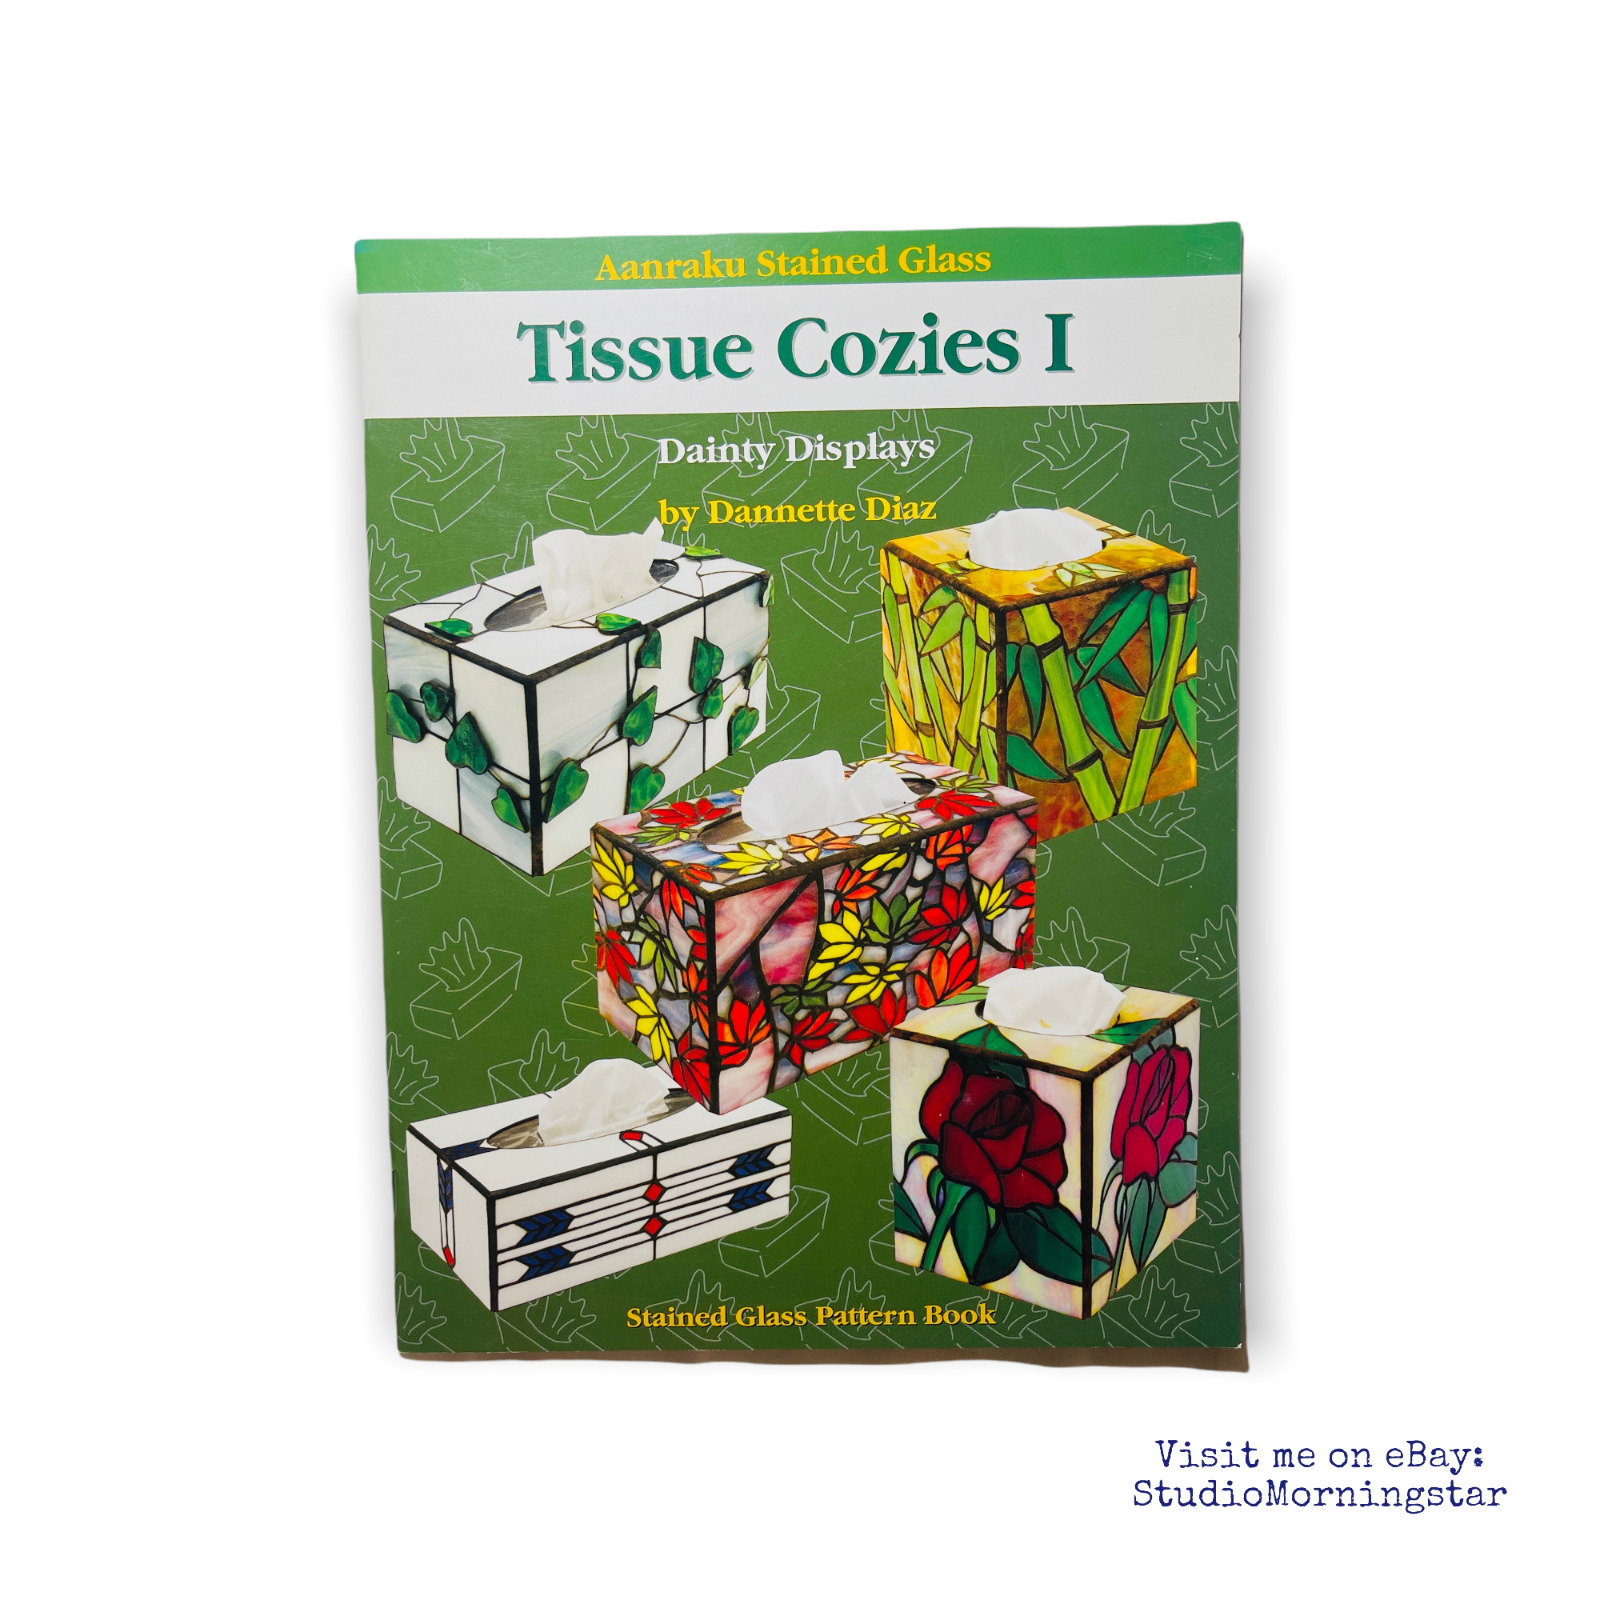 Tissue Cozies 1 Stained Glass Pattern Book By Dannette Diaz Aanraku Tissue Box